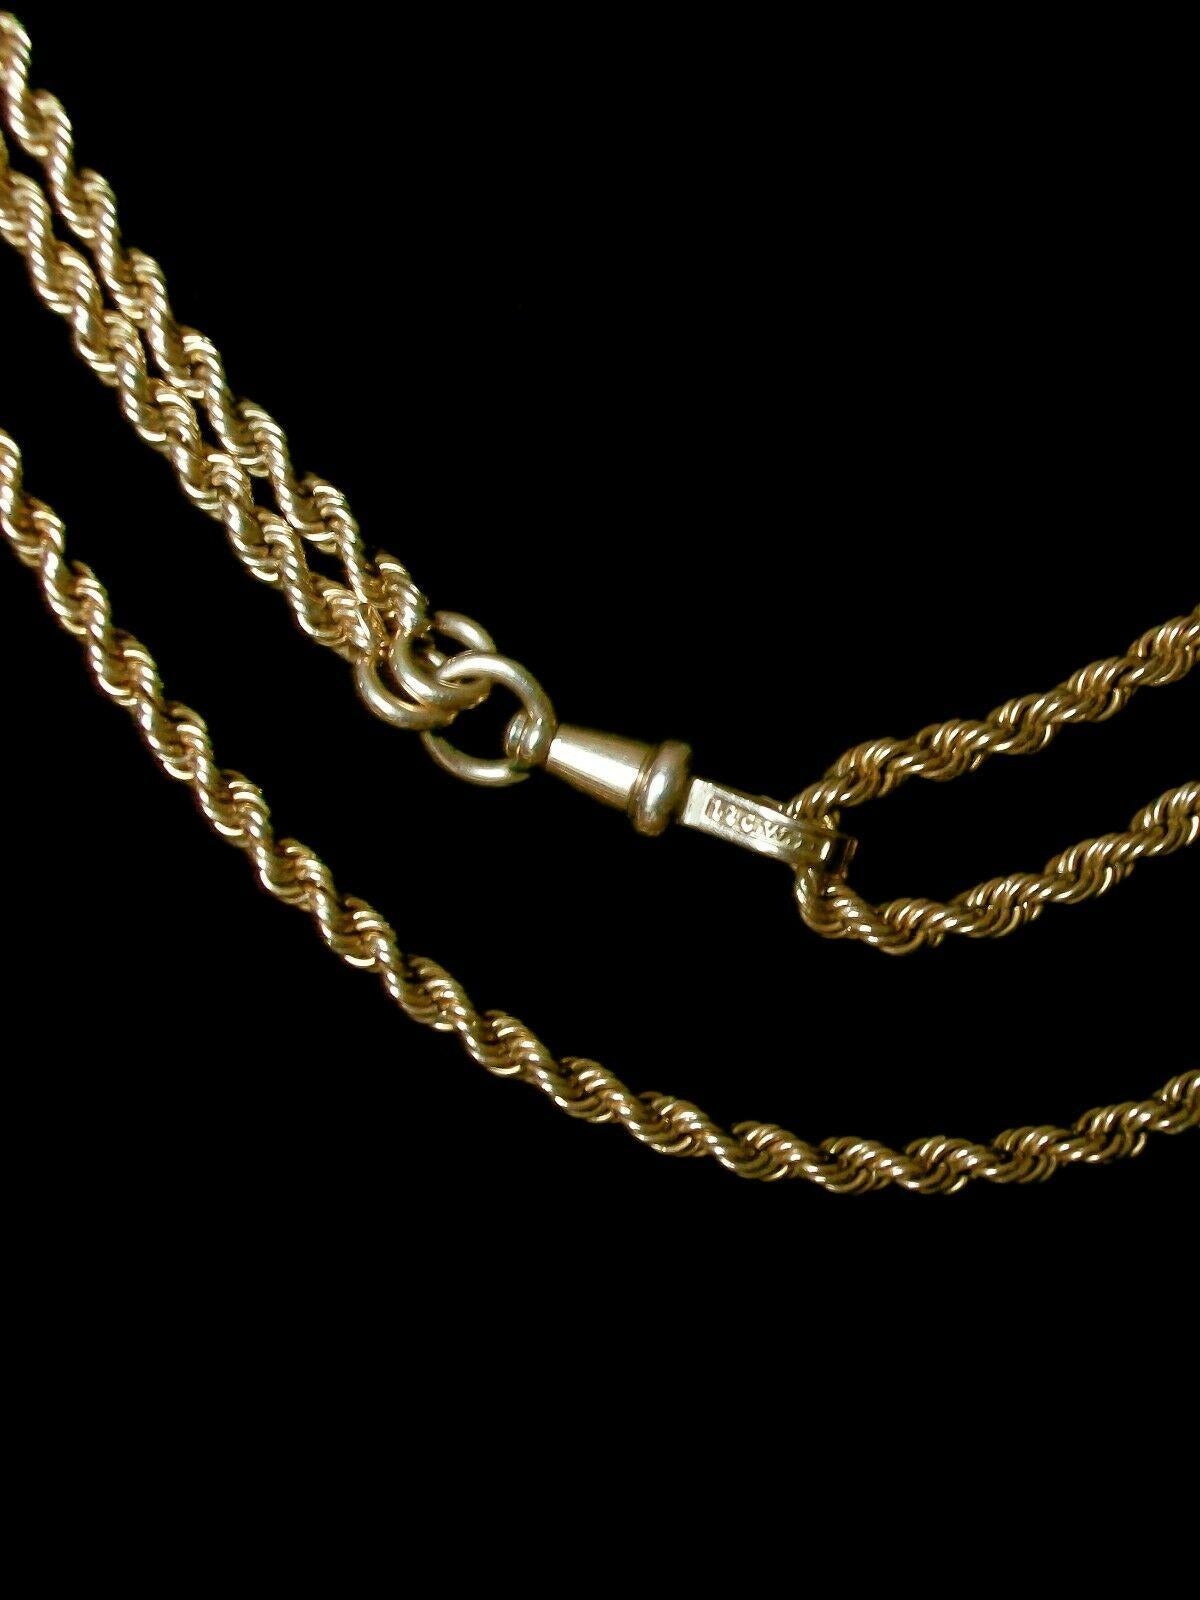 Victorian Gold Rope Twist Pocket Watch Chain / Necklace, U.S, circa 1880 For Sale 2